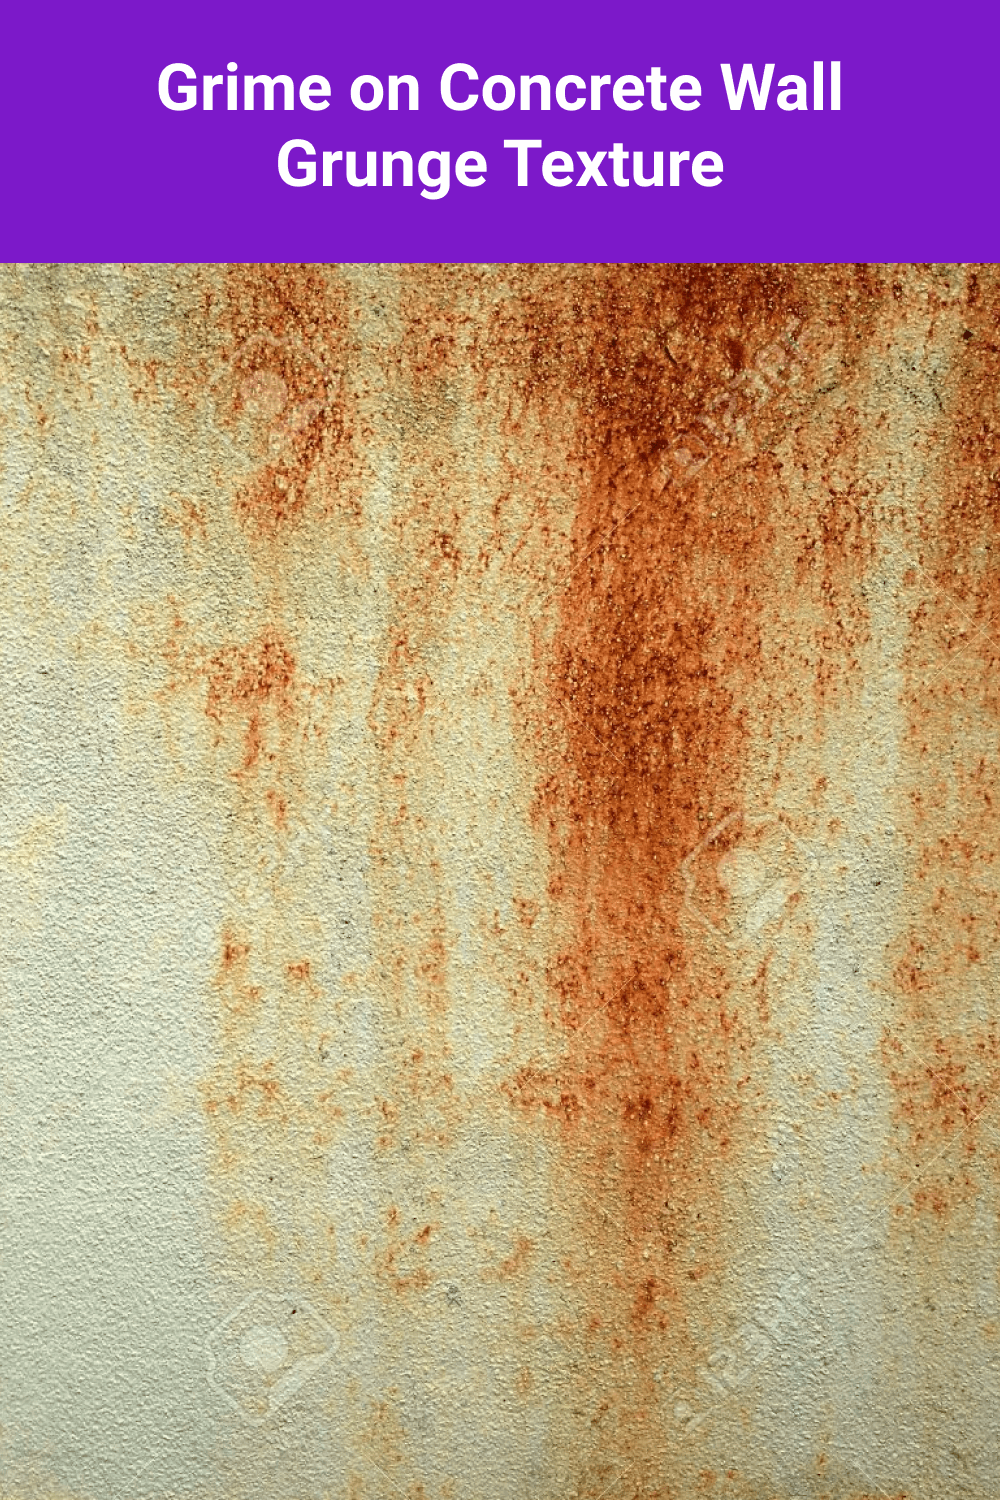 Grime on concrete wall grunge texture.